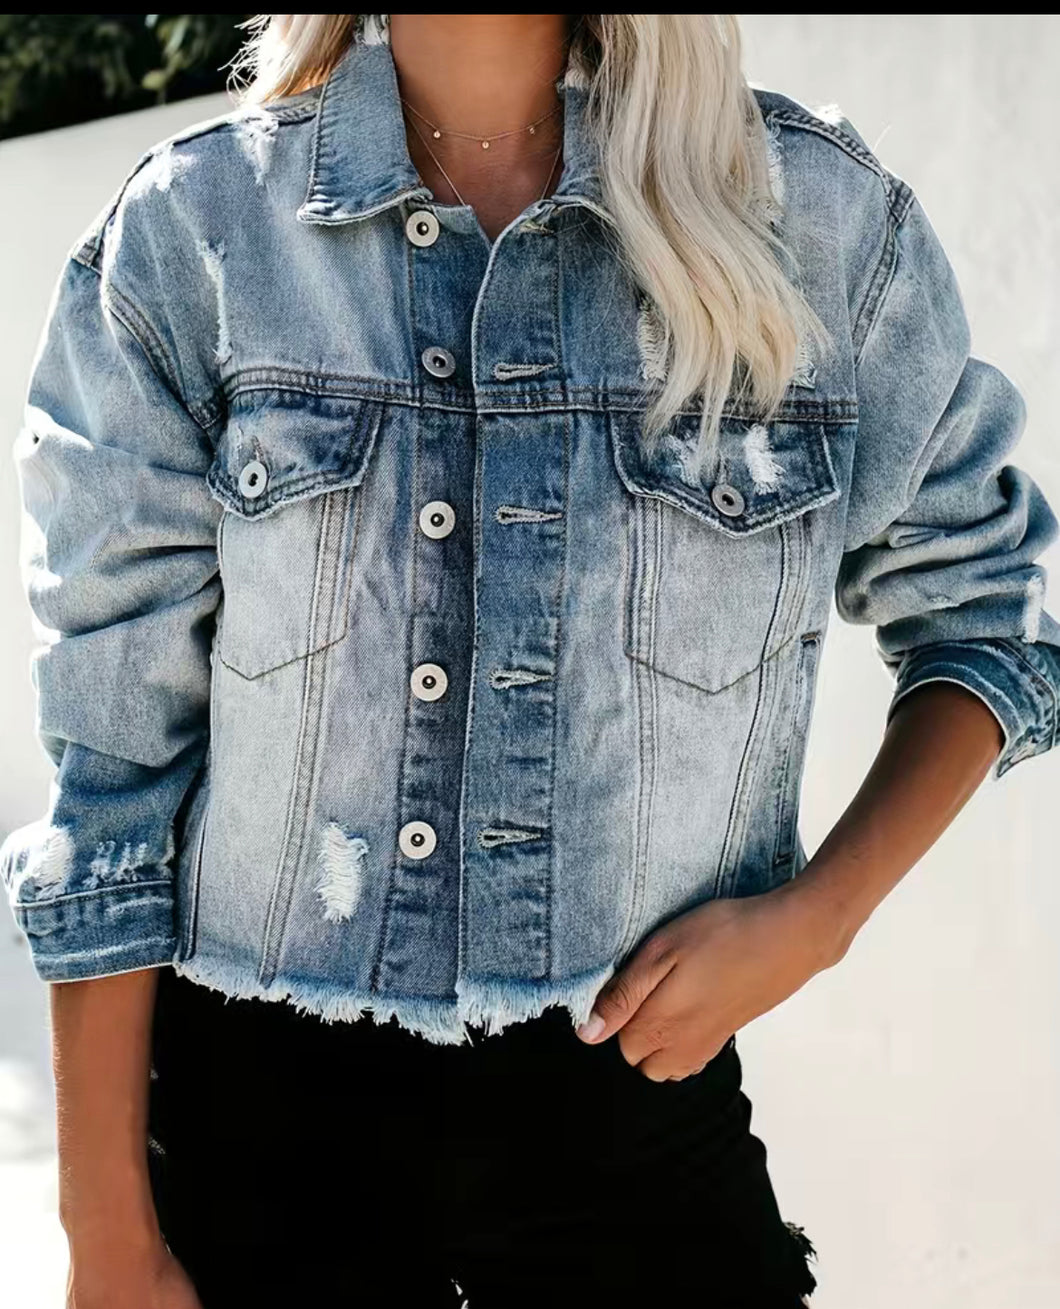 The Perfect Distressed Jacket